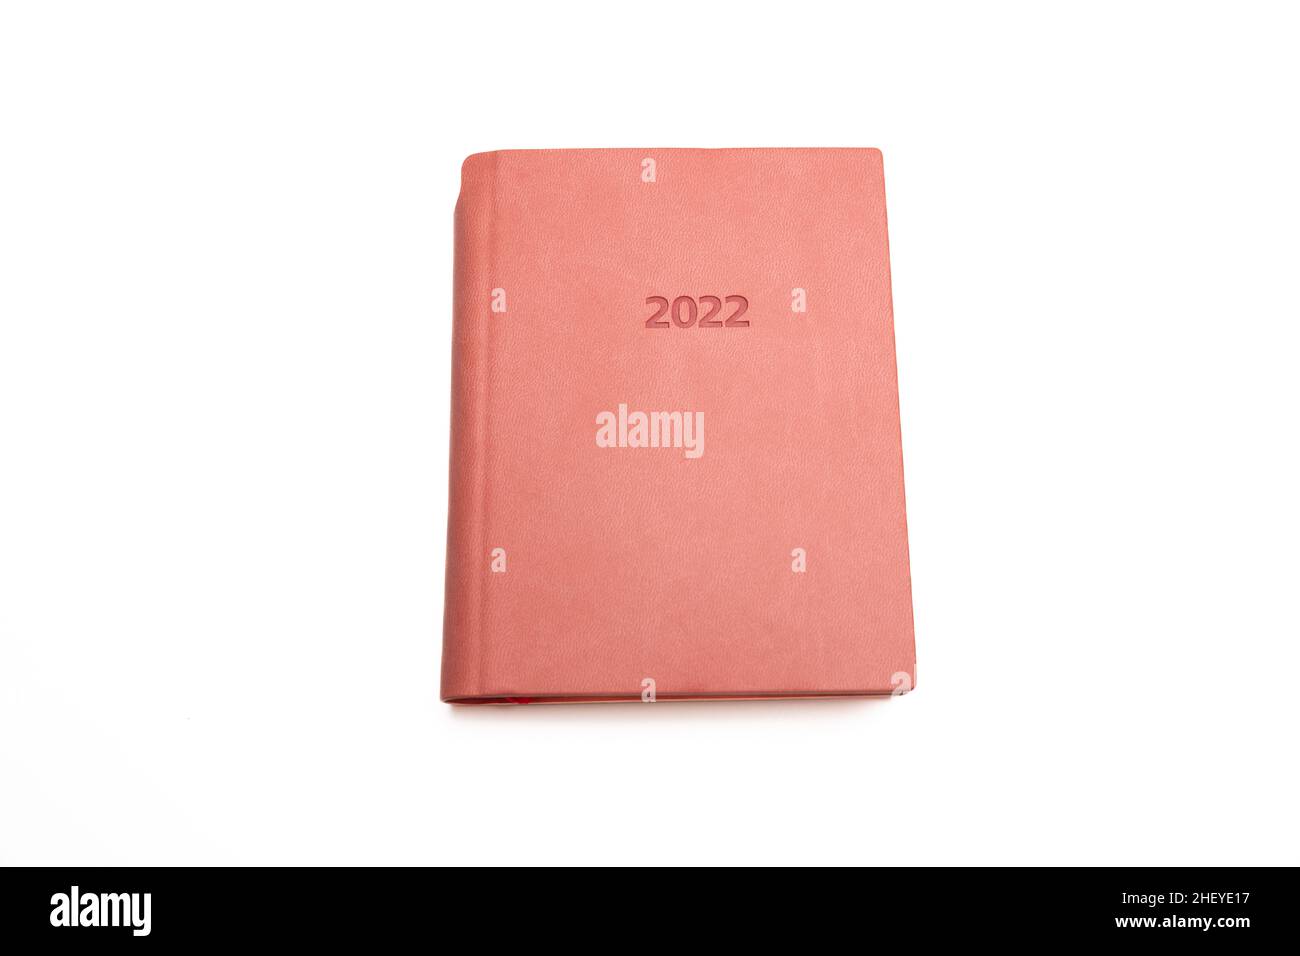 2022 year diary isolated on white background. Pink color cover, hardcover book, leather office agenda for business note Stock Photo